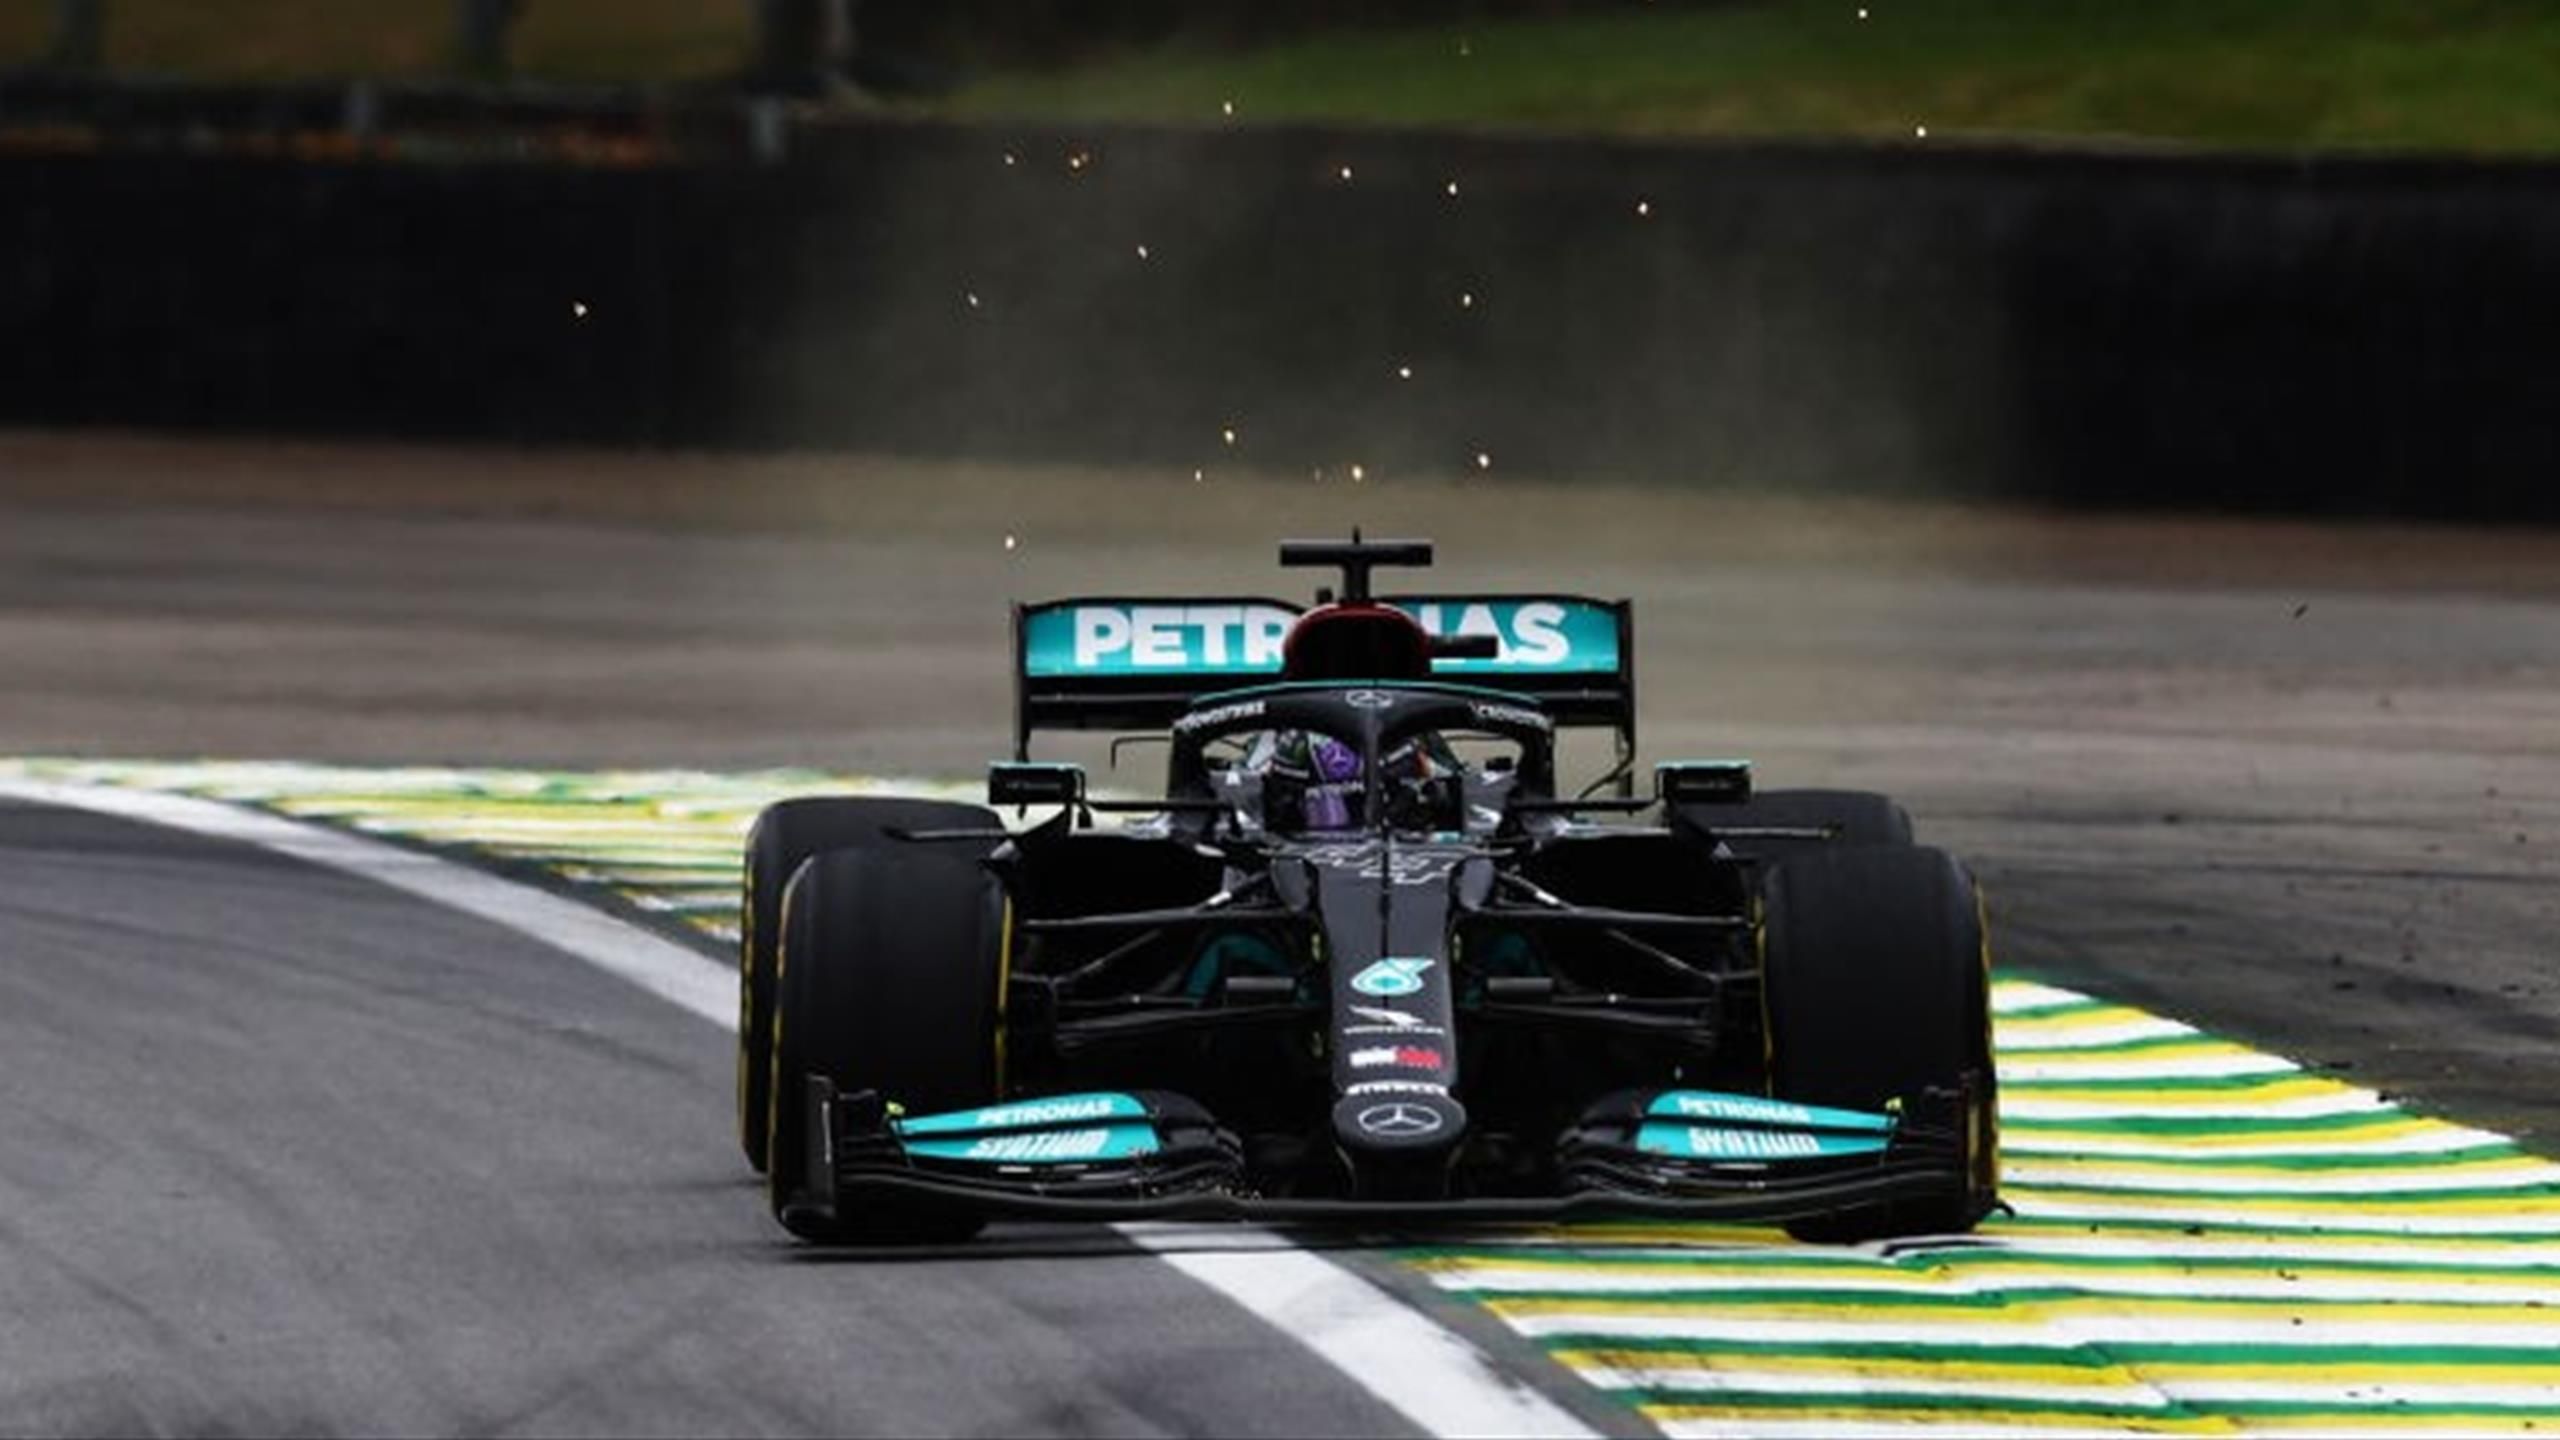 Lewis Hamilton shows superb pace to take top spot in Brazilian Grand Prix qualifying, summoned to stewards over DRS